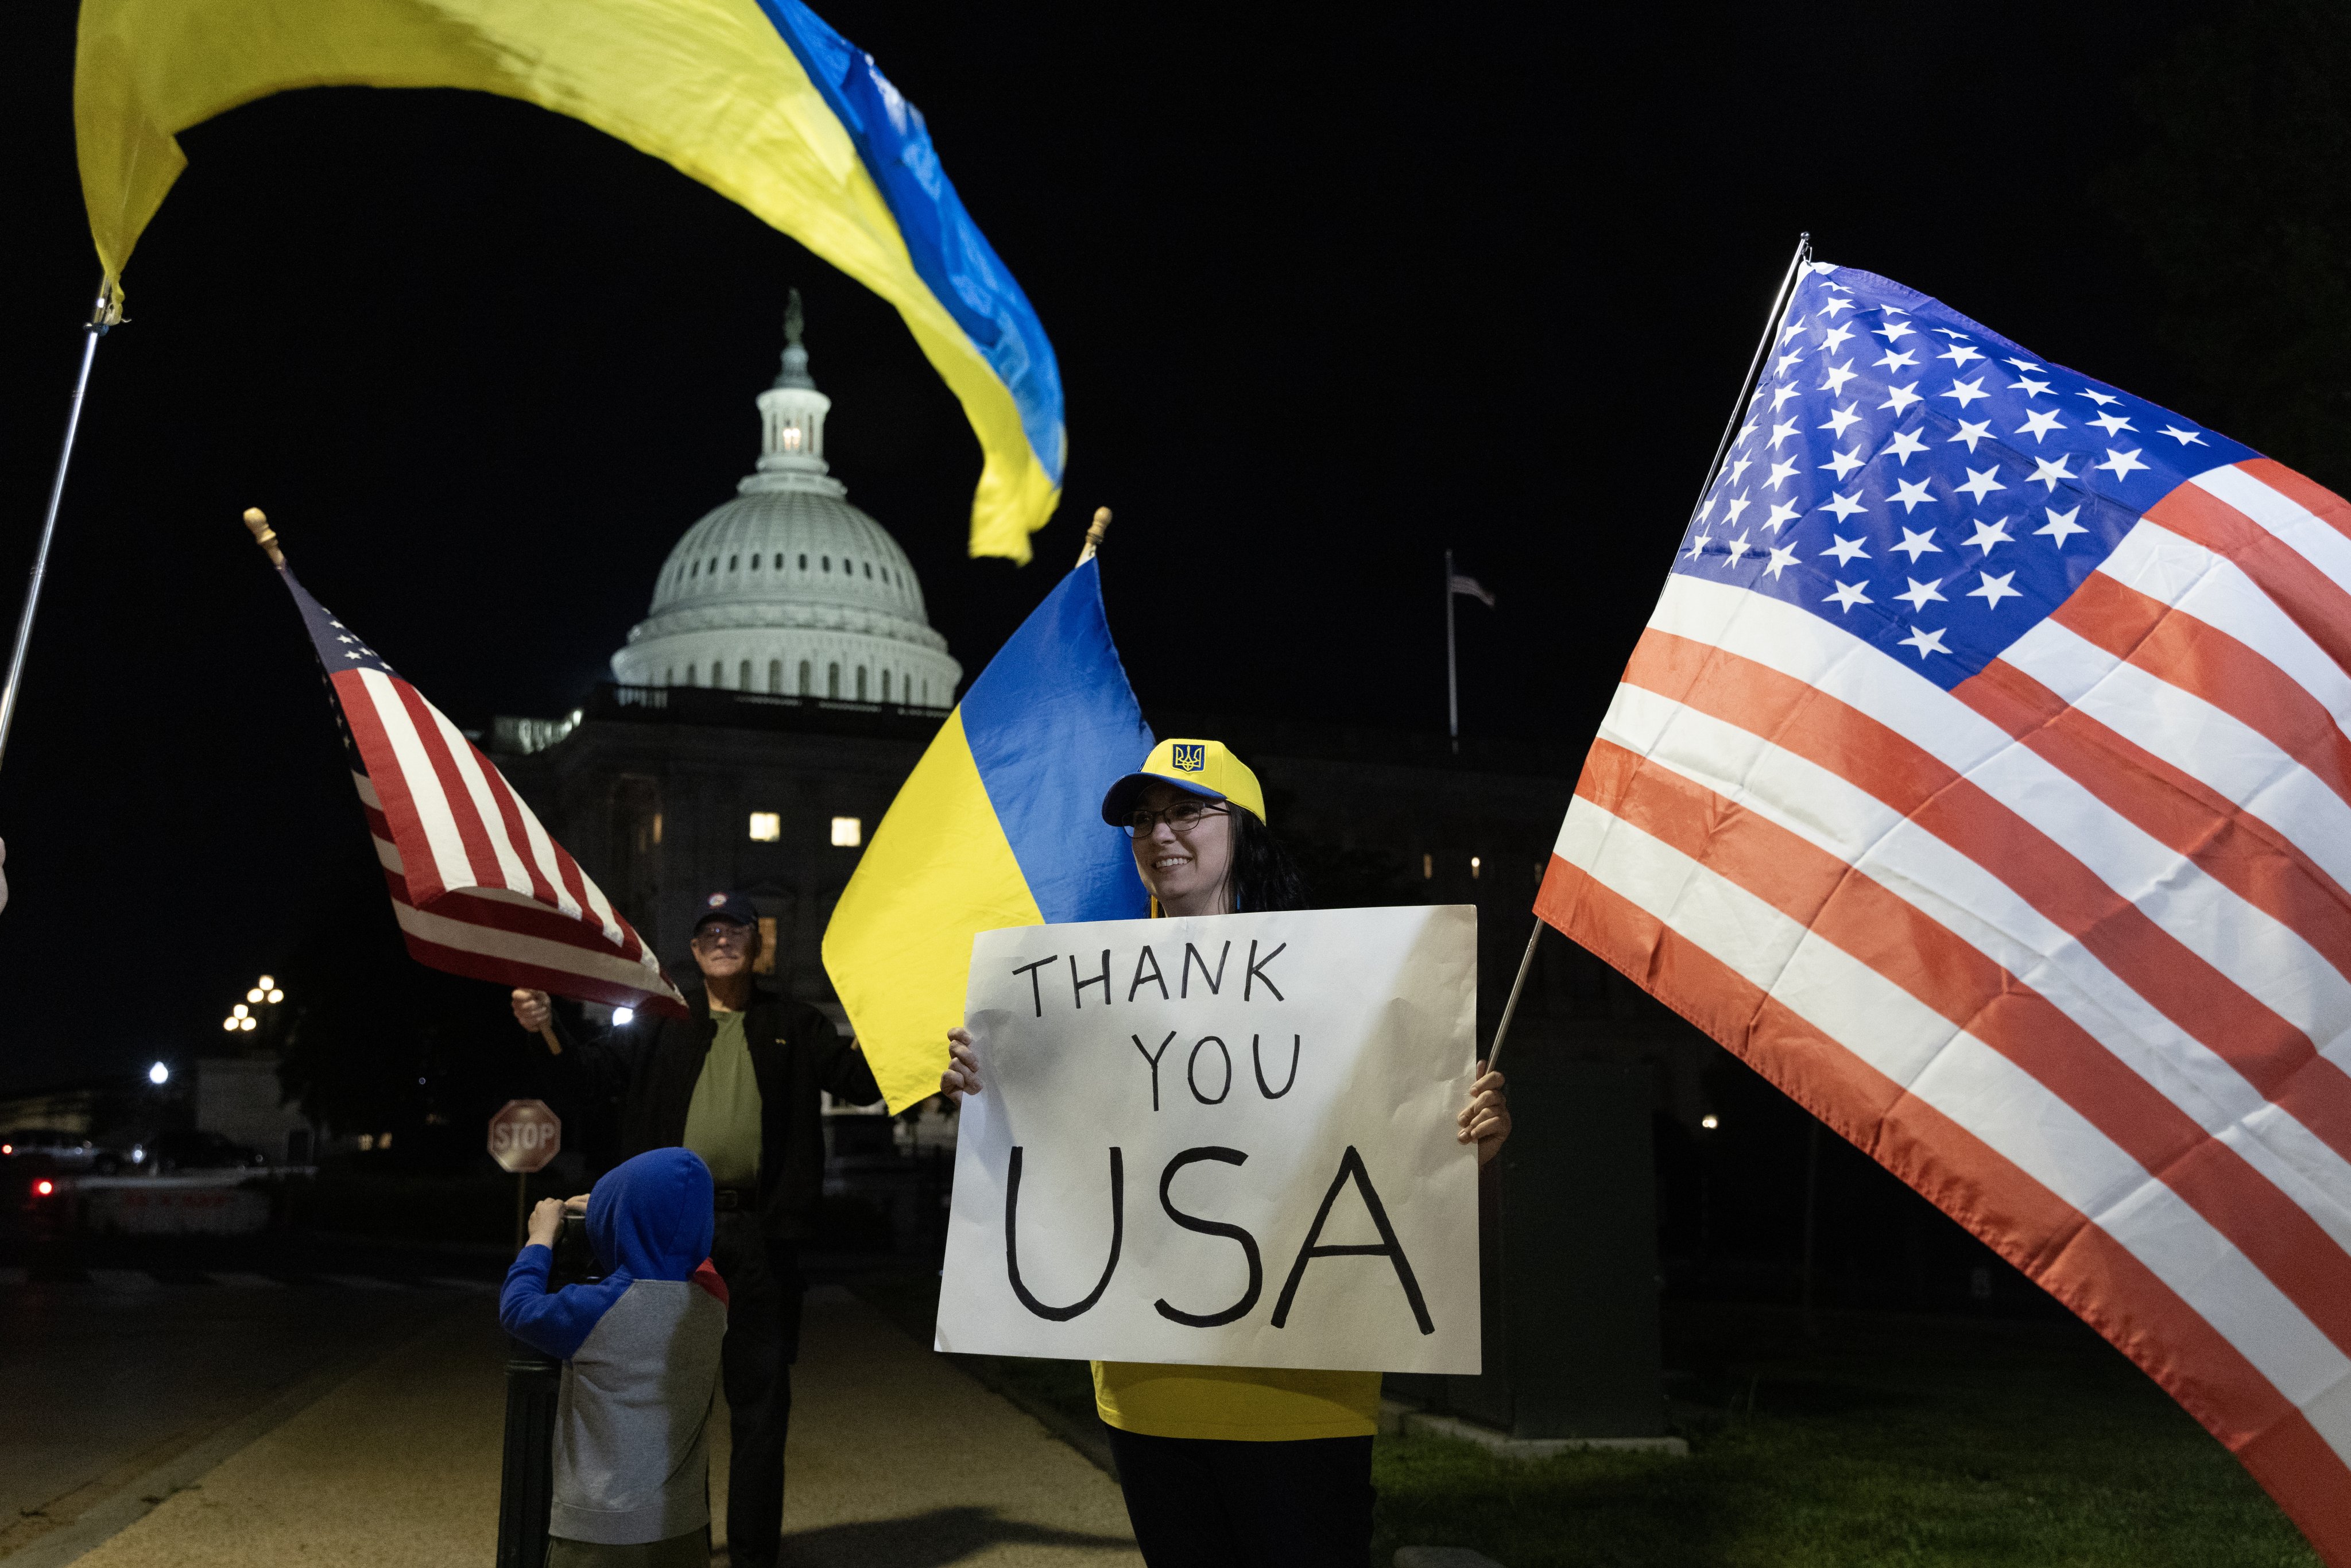 Supporters of Ukraine outside the US Capitol in Washington after the US Senate vote. Photo: EPA-EFE